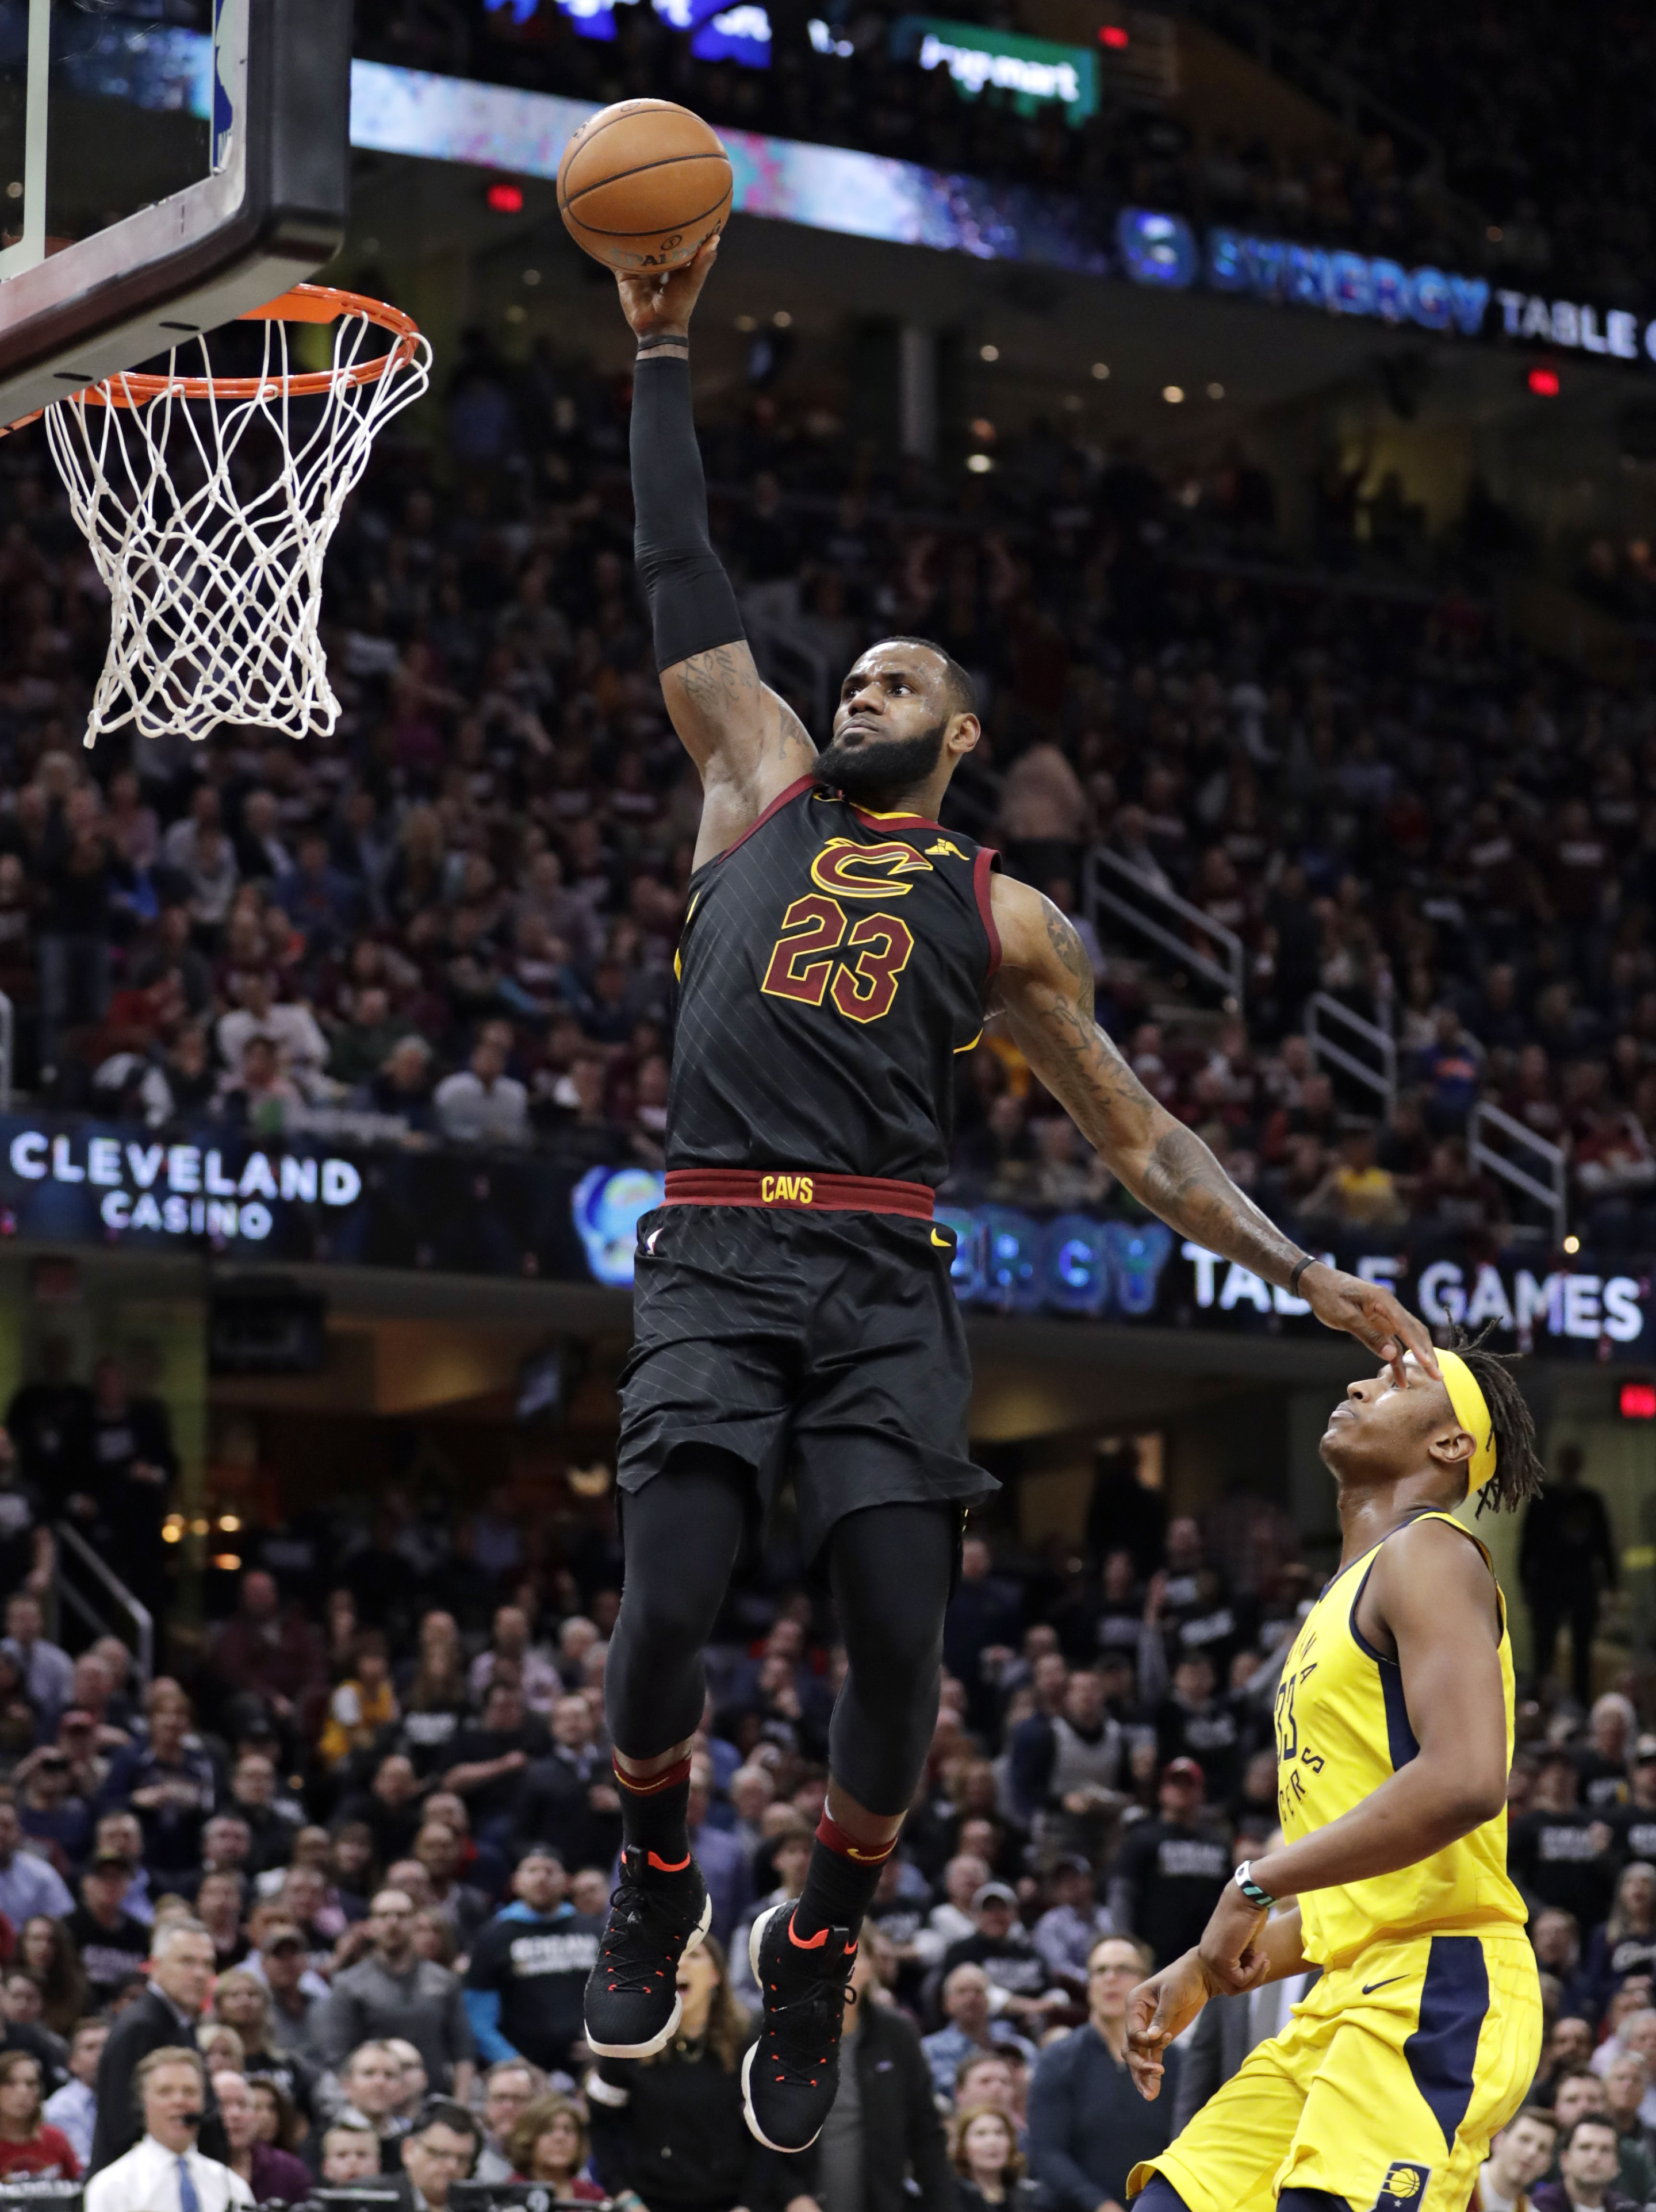 LeBron scores 46, Cavaliers hold off Pacers to even series - The Blade